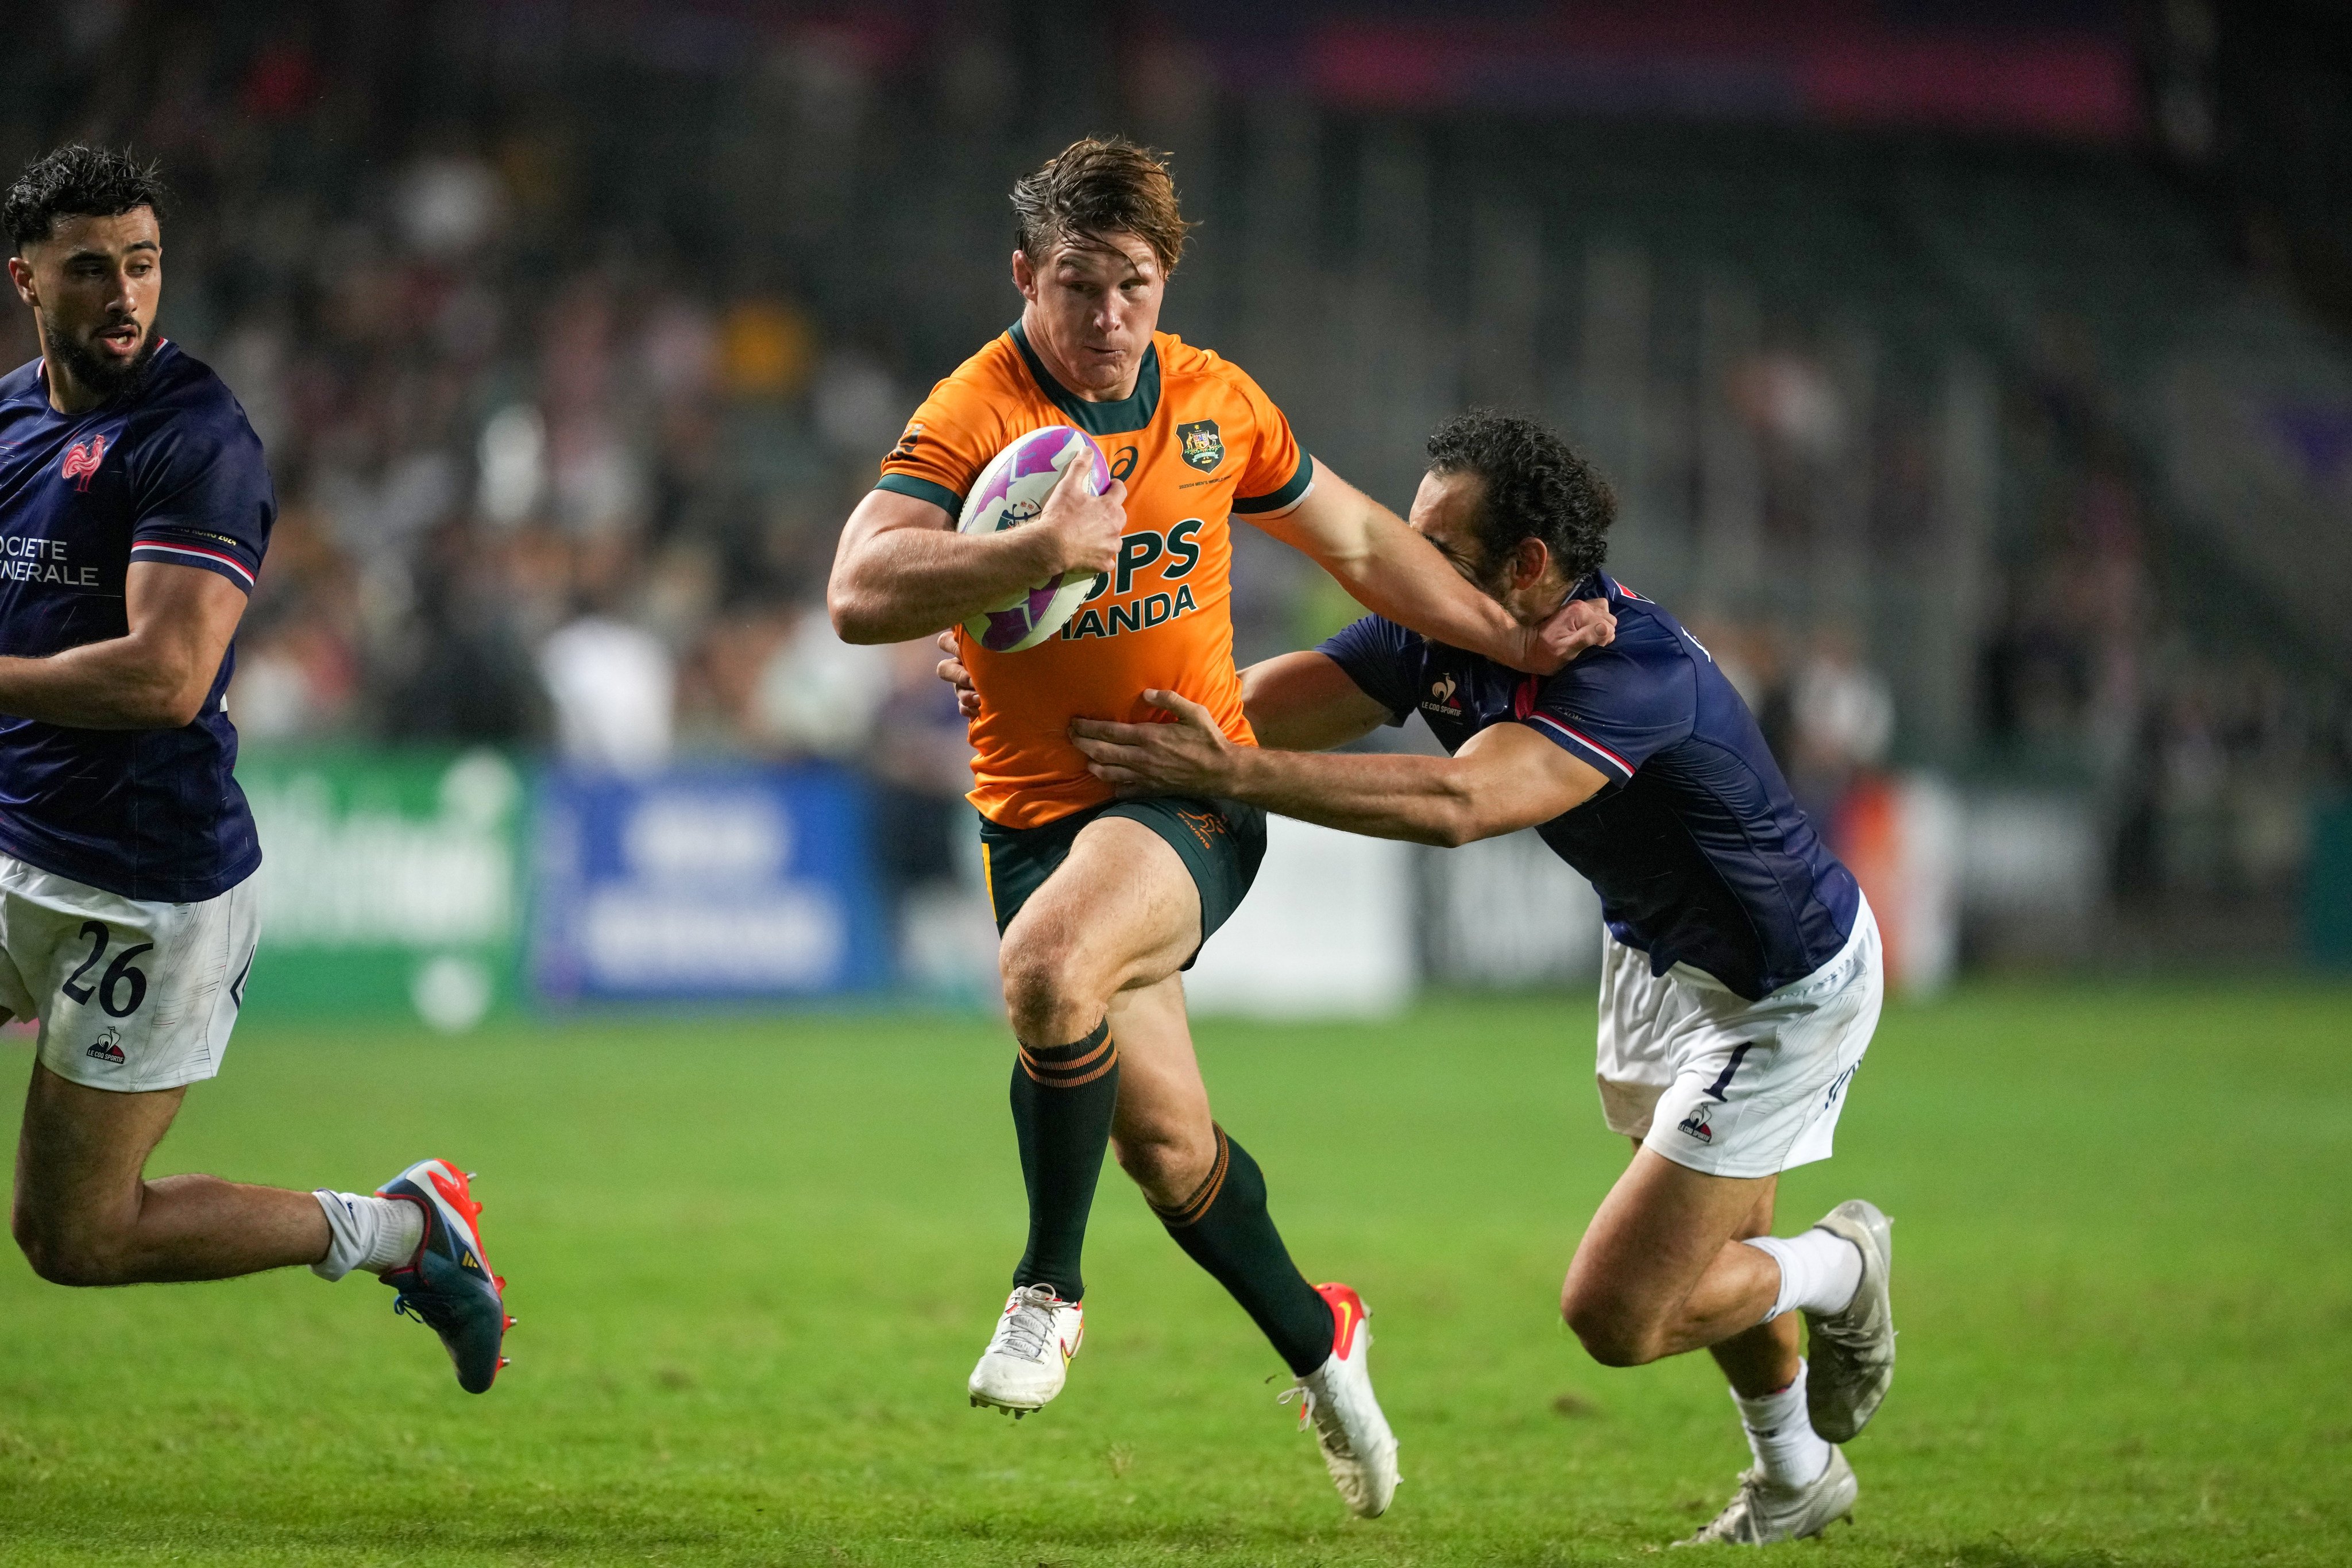 Michael Hooper on the charge against France on his opening day as a sevens player. Photo: Elson Li